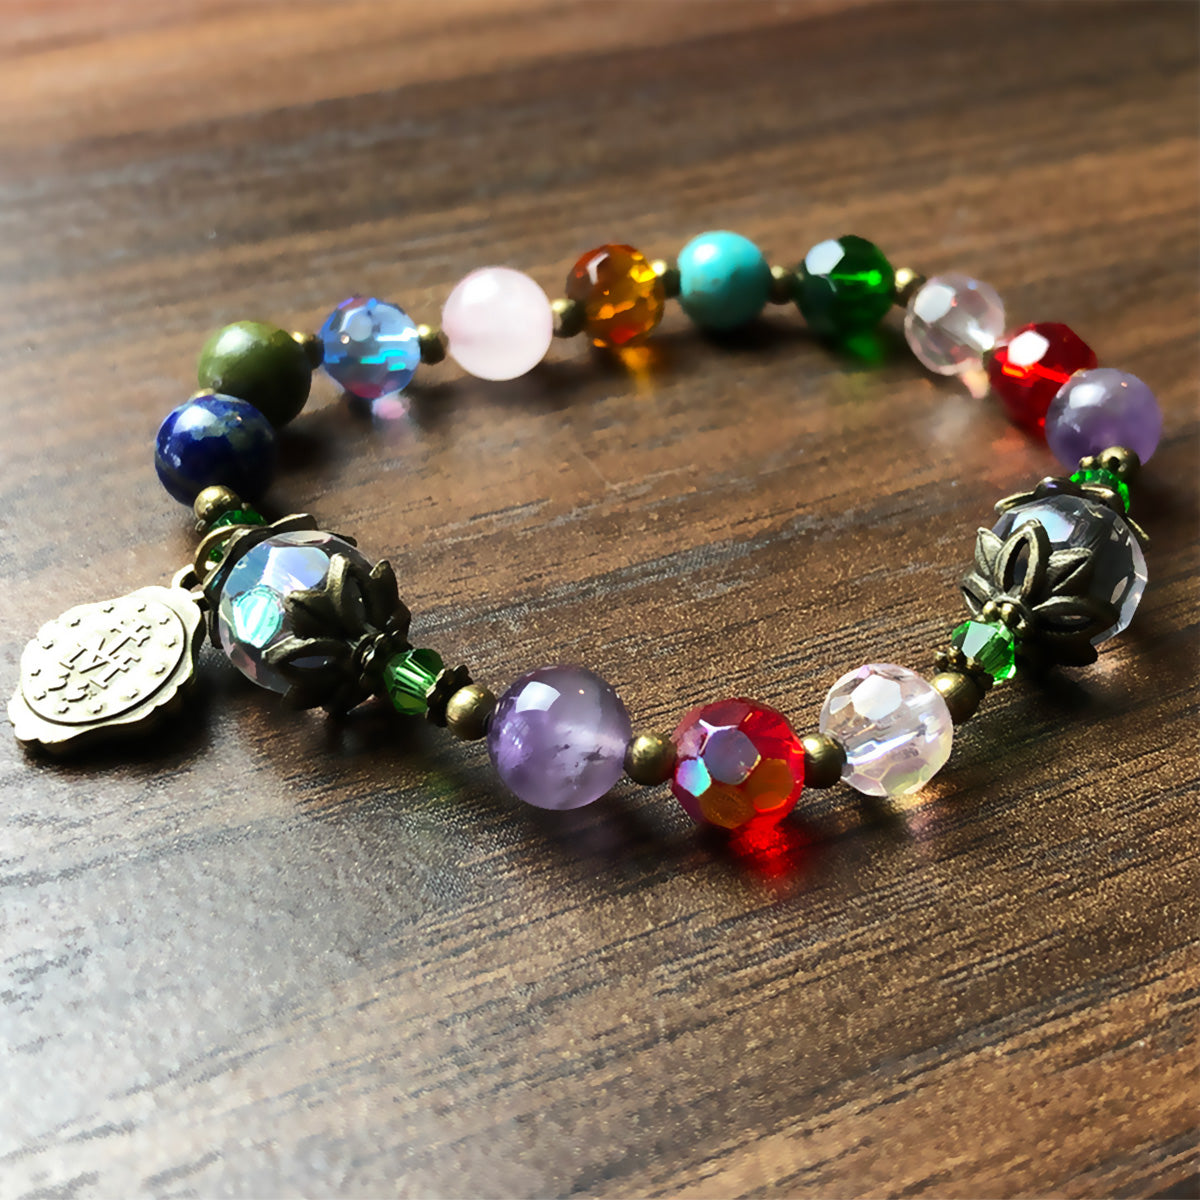 Basilica Window Crystal and Stone Rosary Bracelet by Catholic Heirlooms - Confirmation - Holy Communion Gift